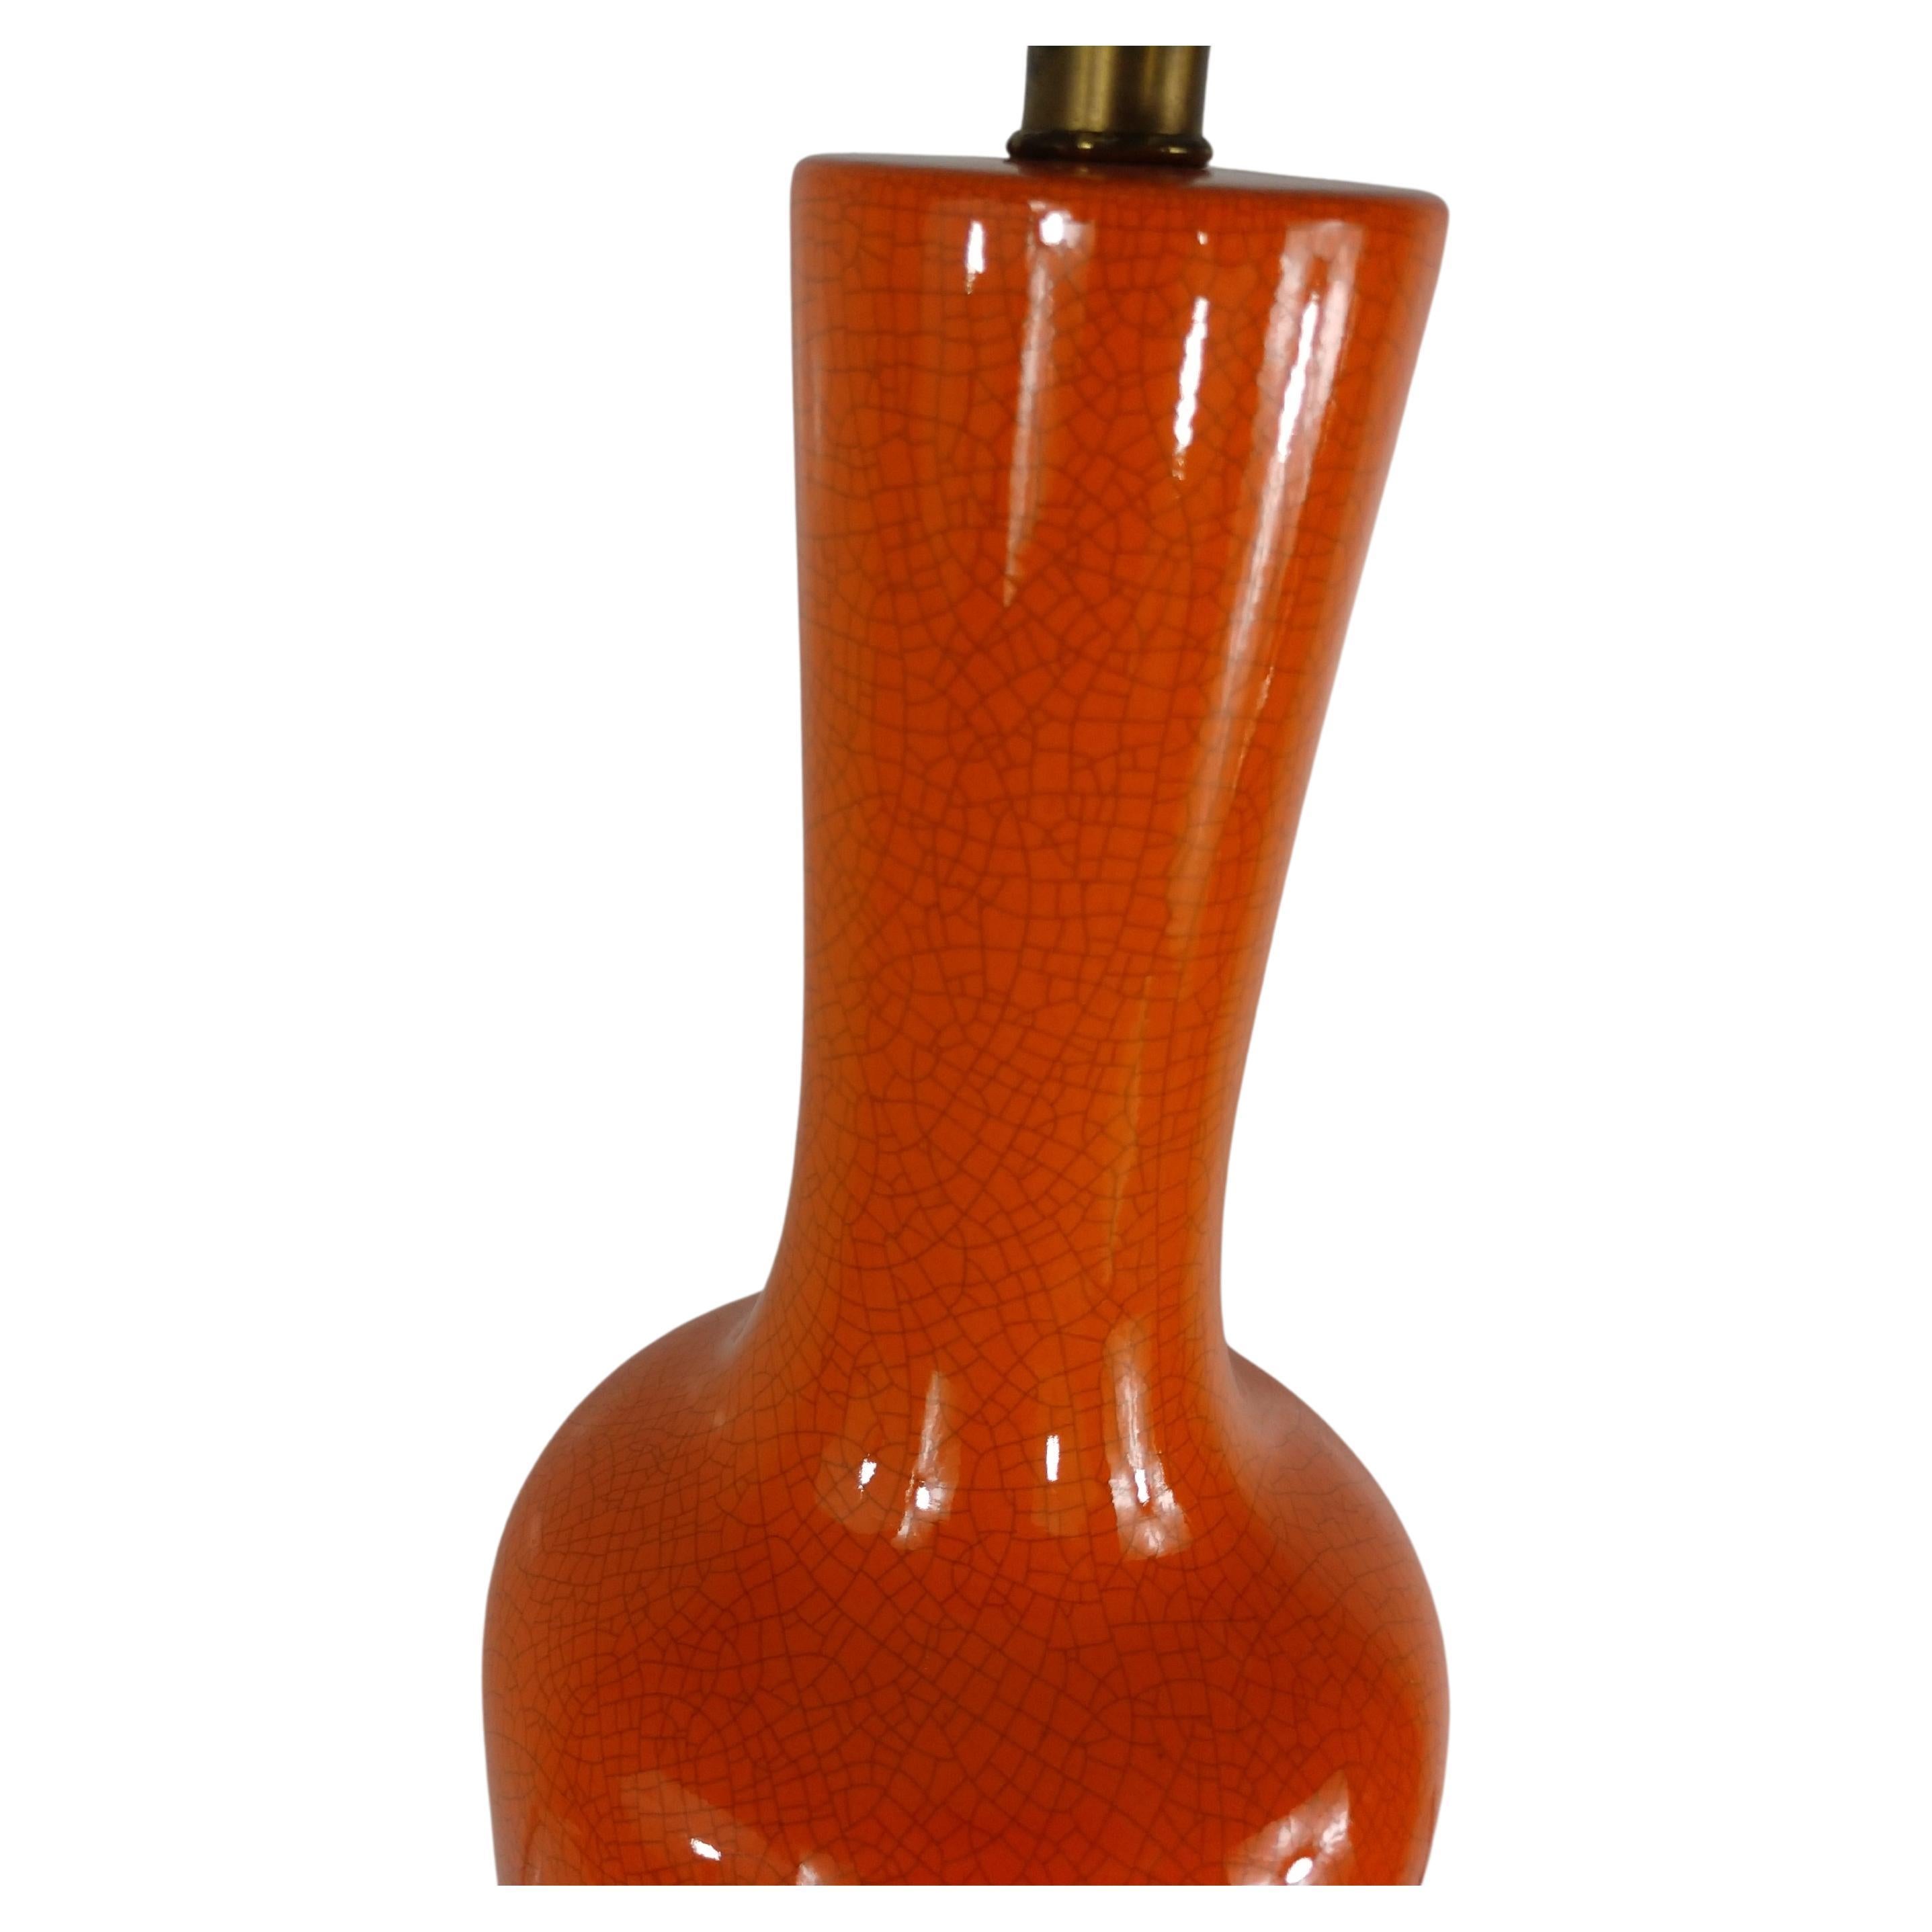 Very elegant and subtle striking pair of mid century lamps. Orange crackle glaze is simply beautiful in a sculpted bottle form. Brass fittings for accent. Shades are 16.75 x 11 H included. 25.75 is the height to top of the socket. In excellent